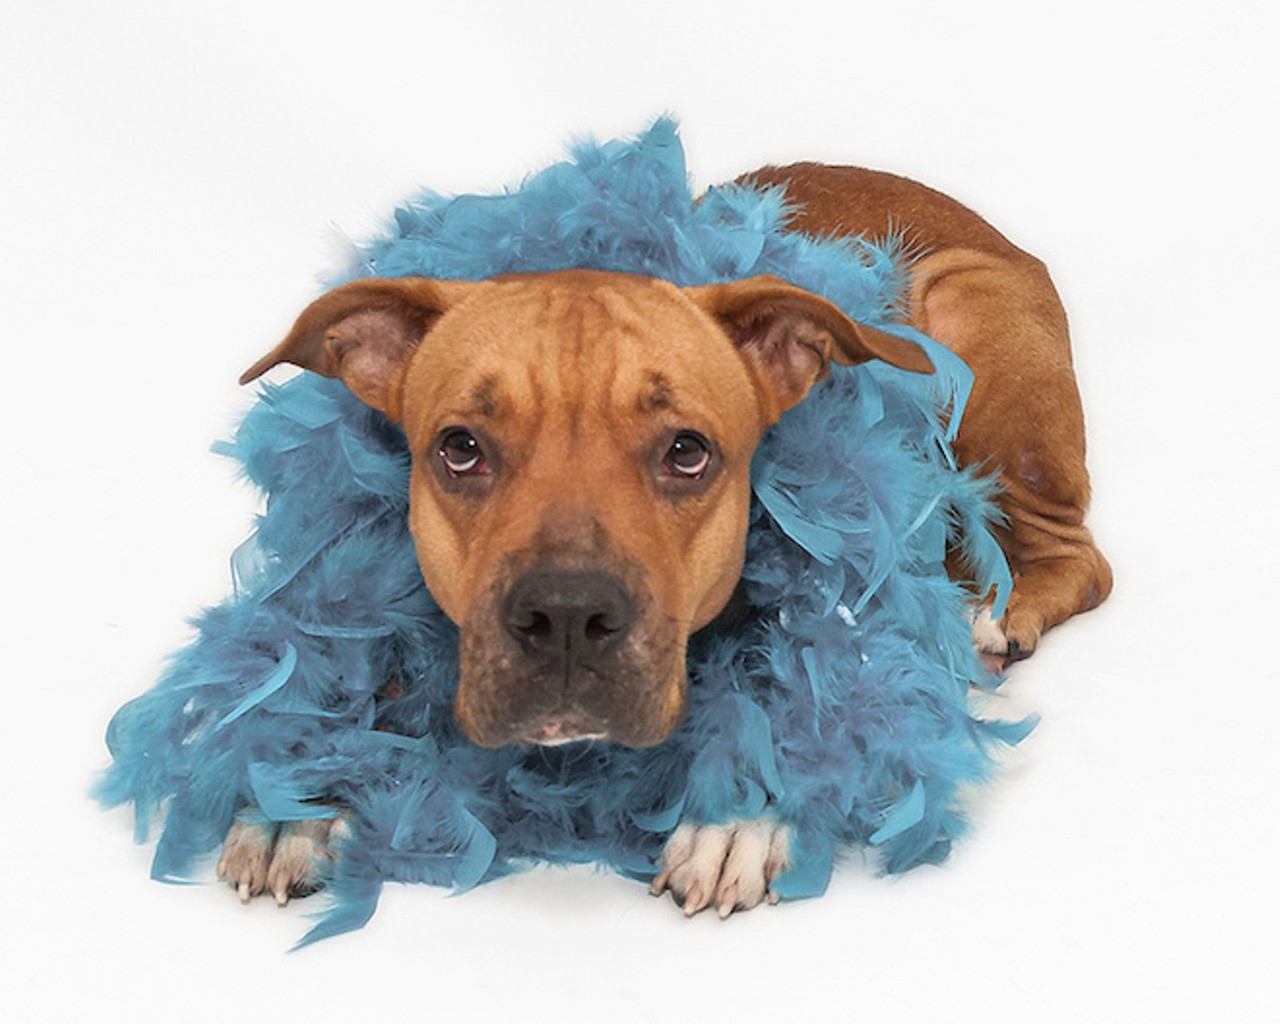 19 adorable adoptable dogs ready to go home with you for the holidays